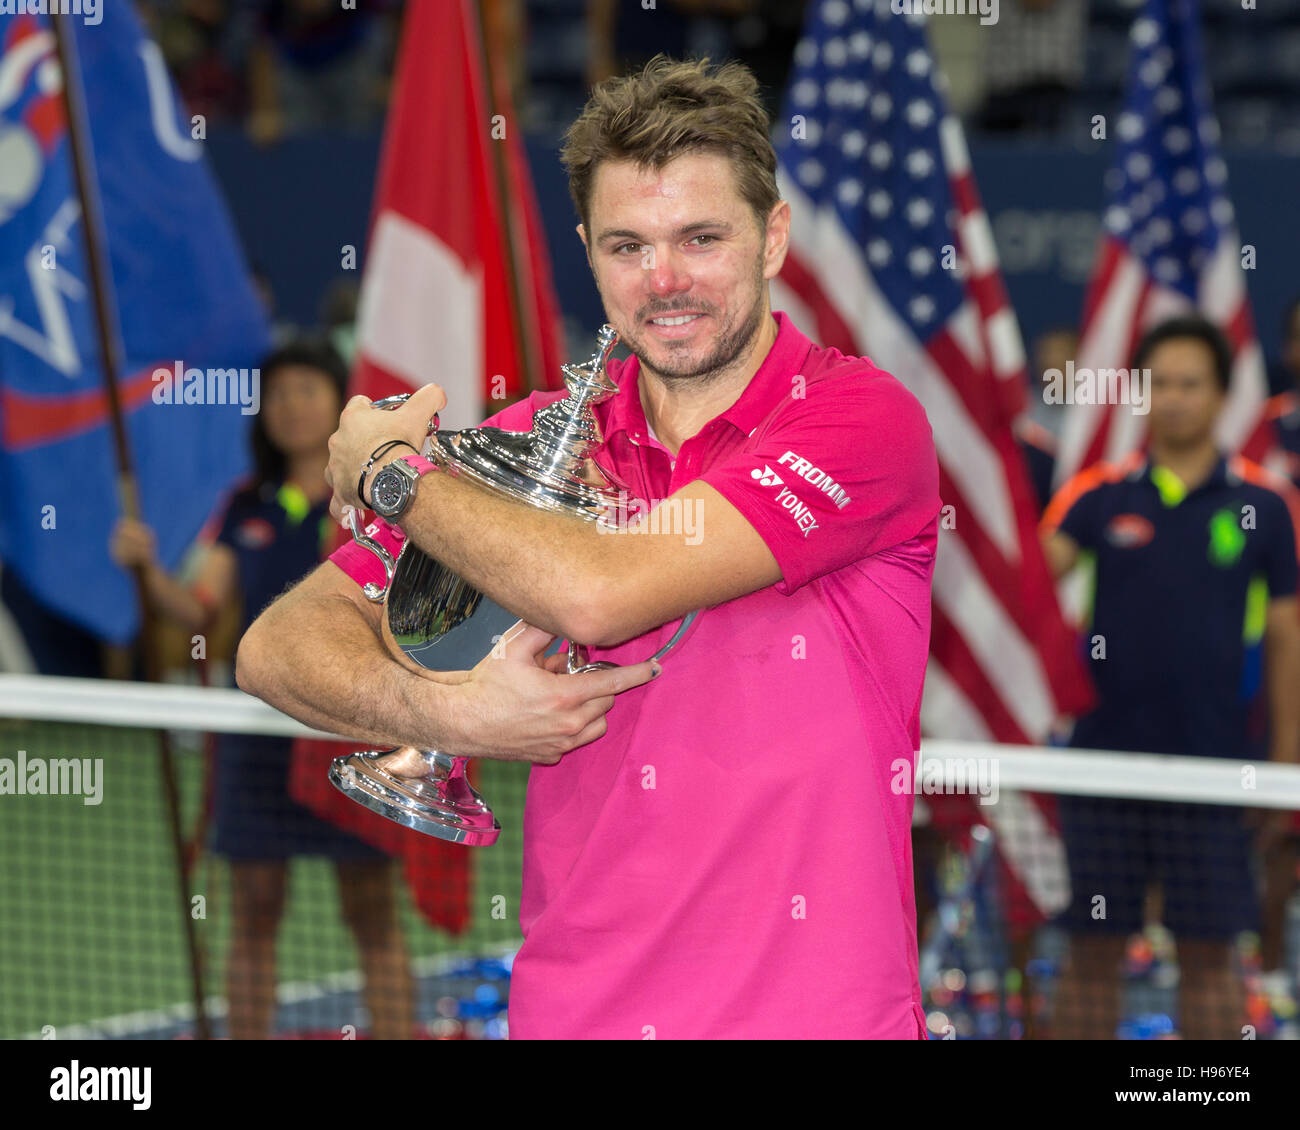 Moderne Rådne neutral Winner Stan Wawrinka (SUI) with the trophy at the US Open 2016 Championships  in Flushing Meadows,New York,USA Stock Photo - Alamy